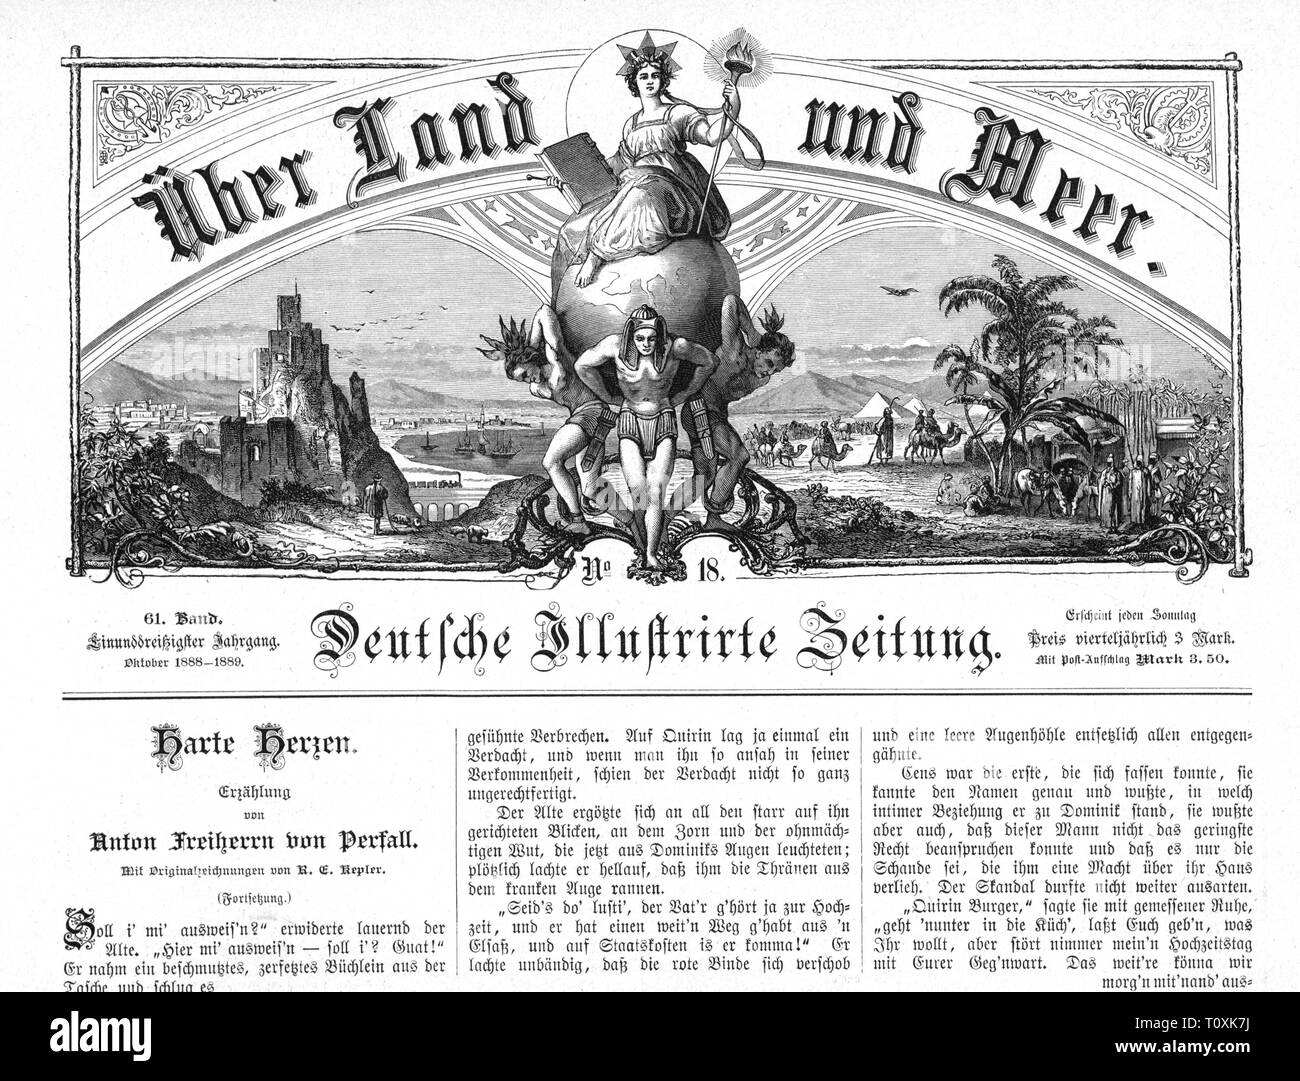 press / media, magazines, 'Ueber Land und Meer' (Over Land and Sea), front page, editor: Eduard Hallberger (1822 - 1880), 31st volume, 61st issue, Stuttgart, October 1888, Artist's Copyright has not to be cleared Stock Photo